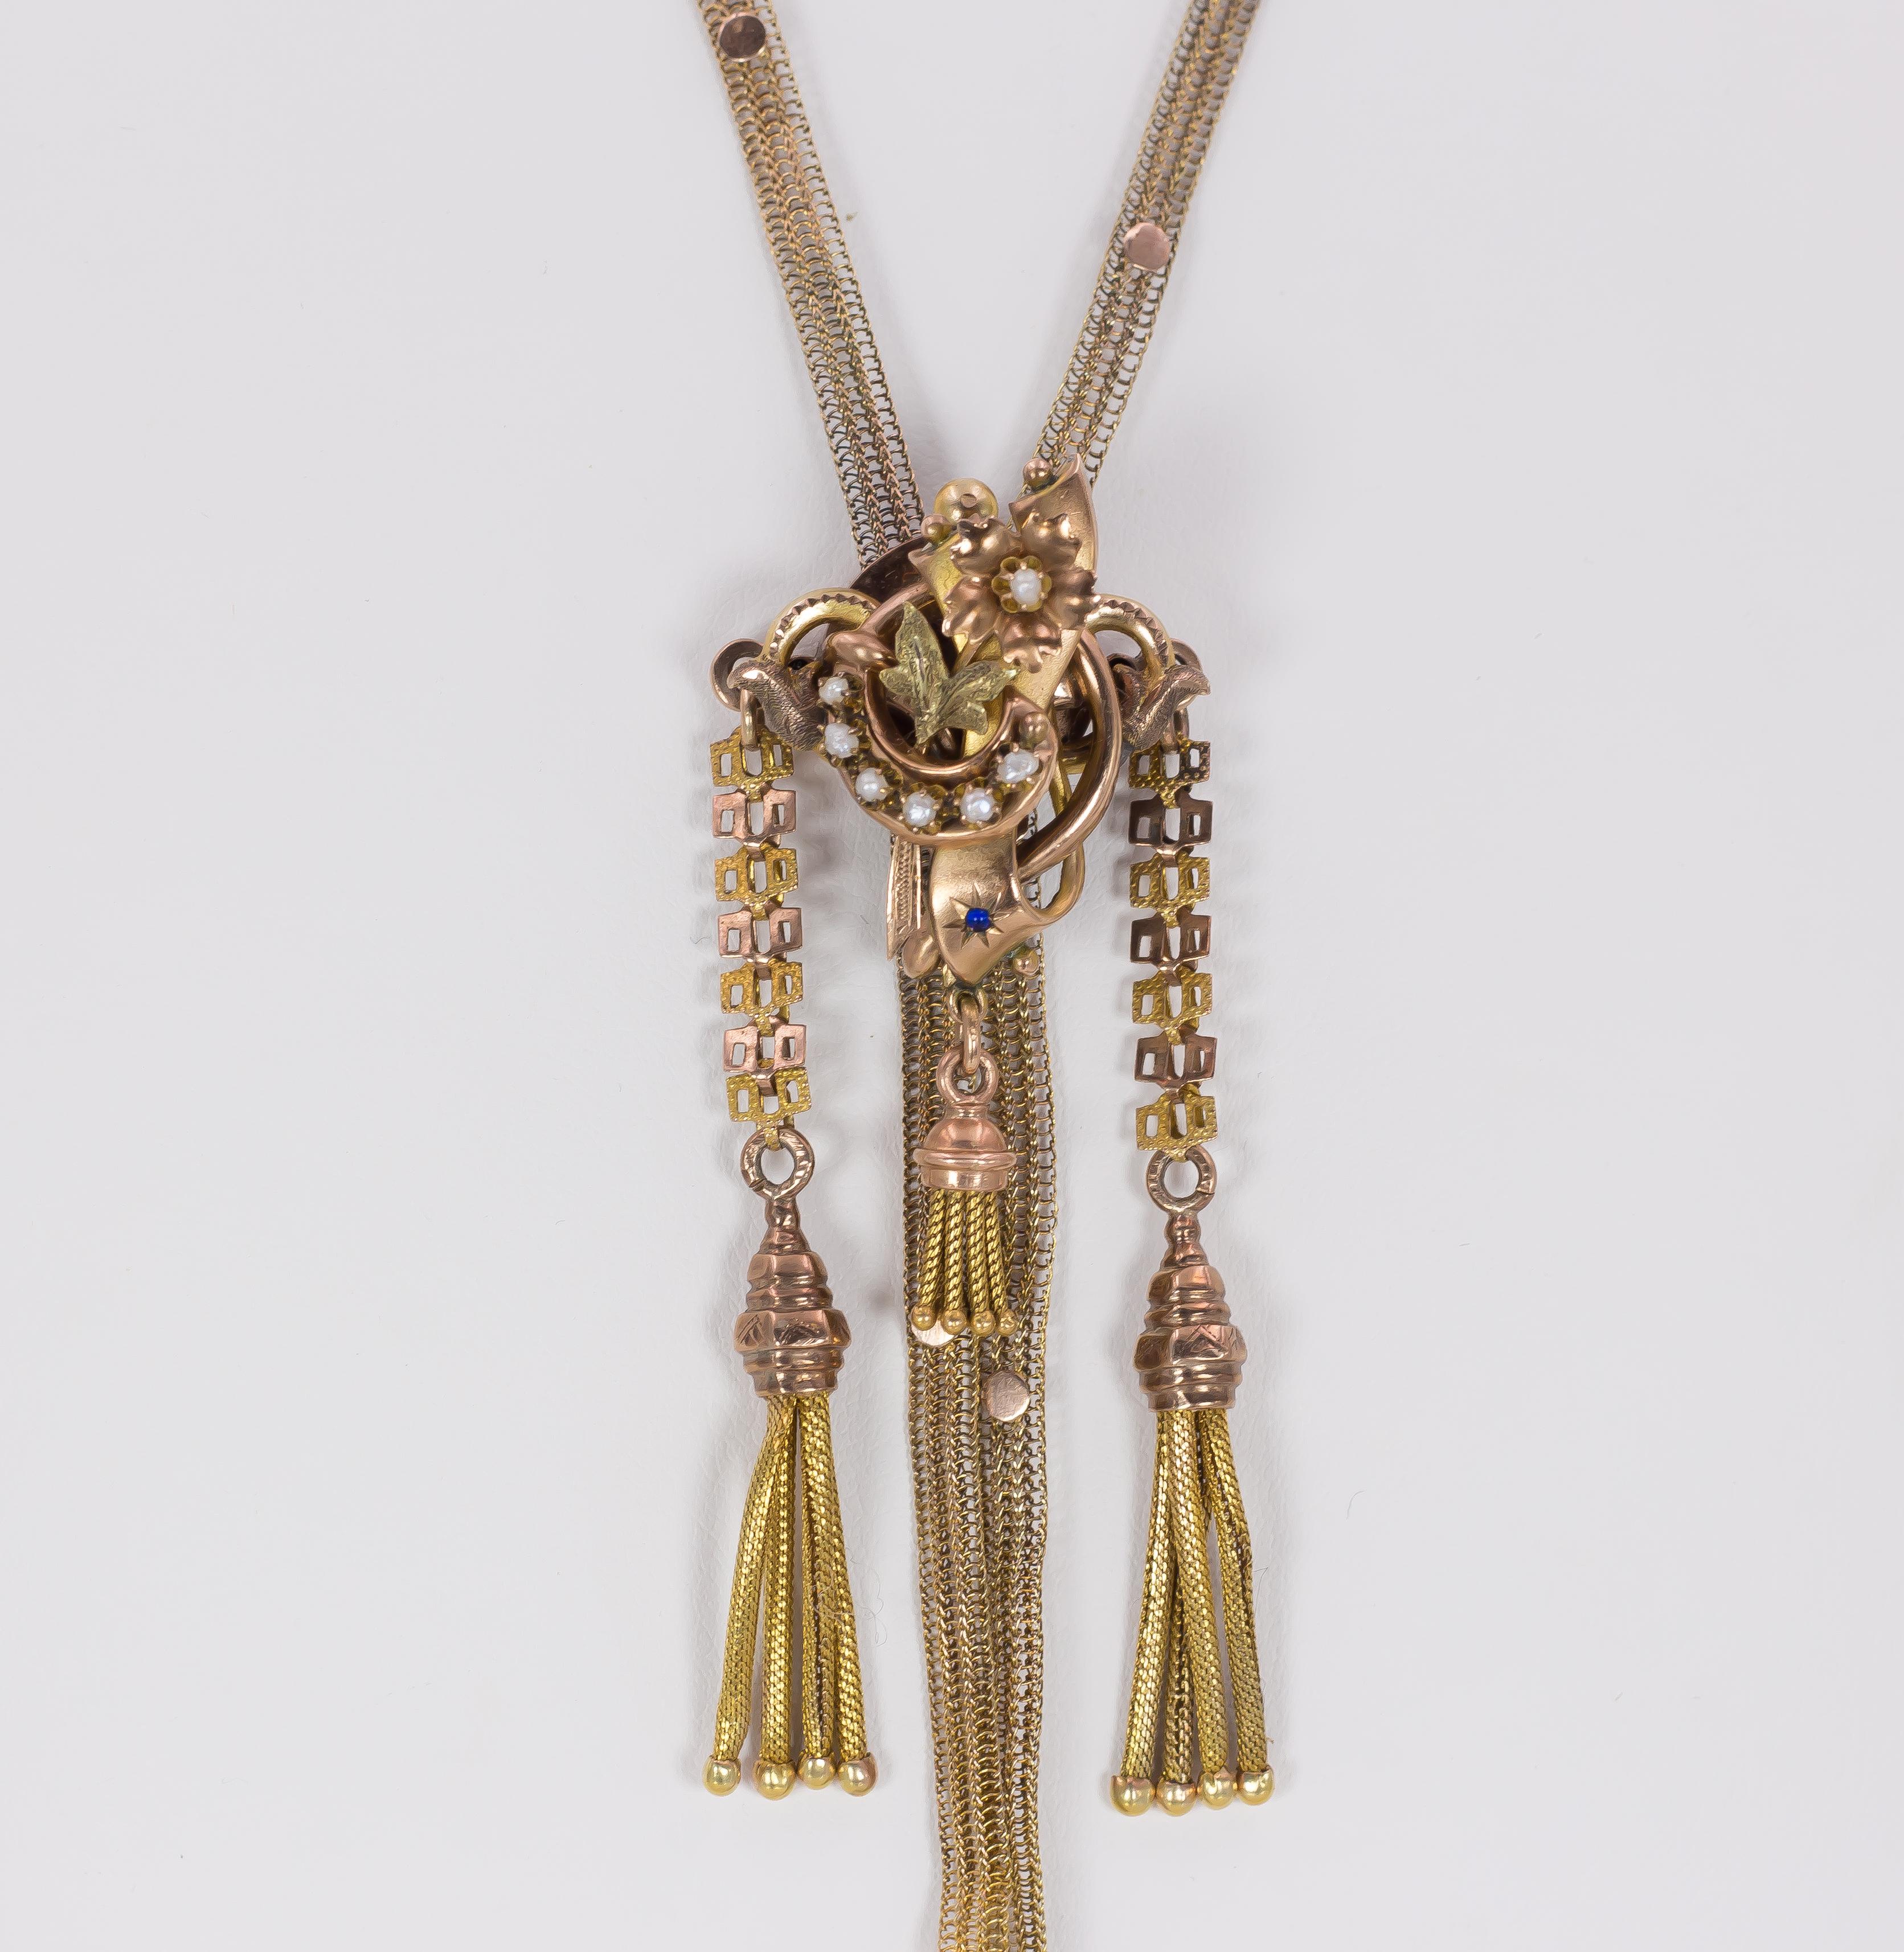 A particular Y-Shaped necklace, dating from the House Bourbon period. It has the typical elements of the period: the low-karat gold, the floral and foliate decorations, the beads and the general aesthetics of the jewel. This necklace is a perfect